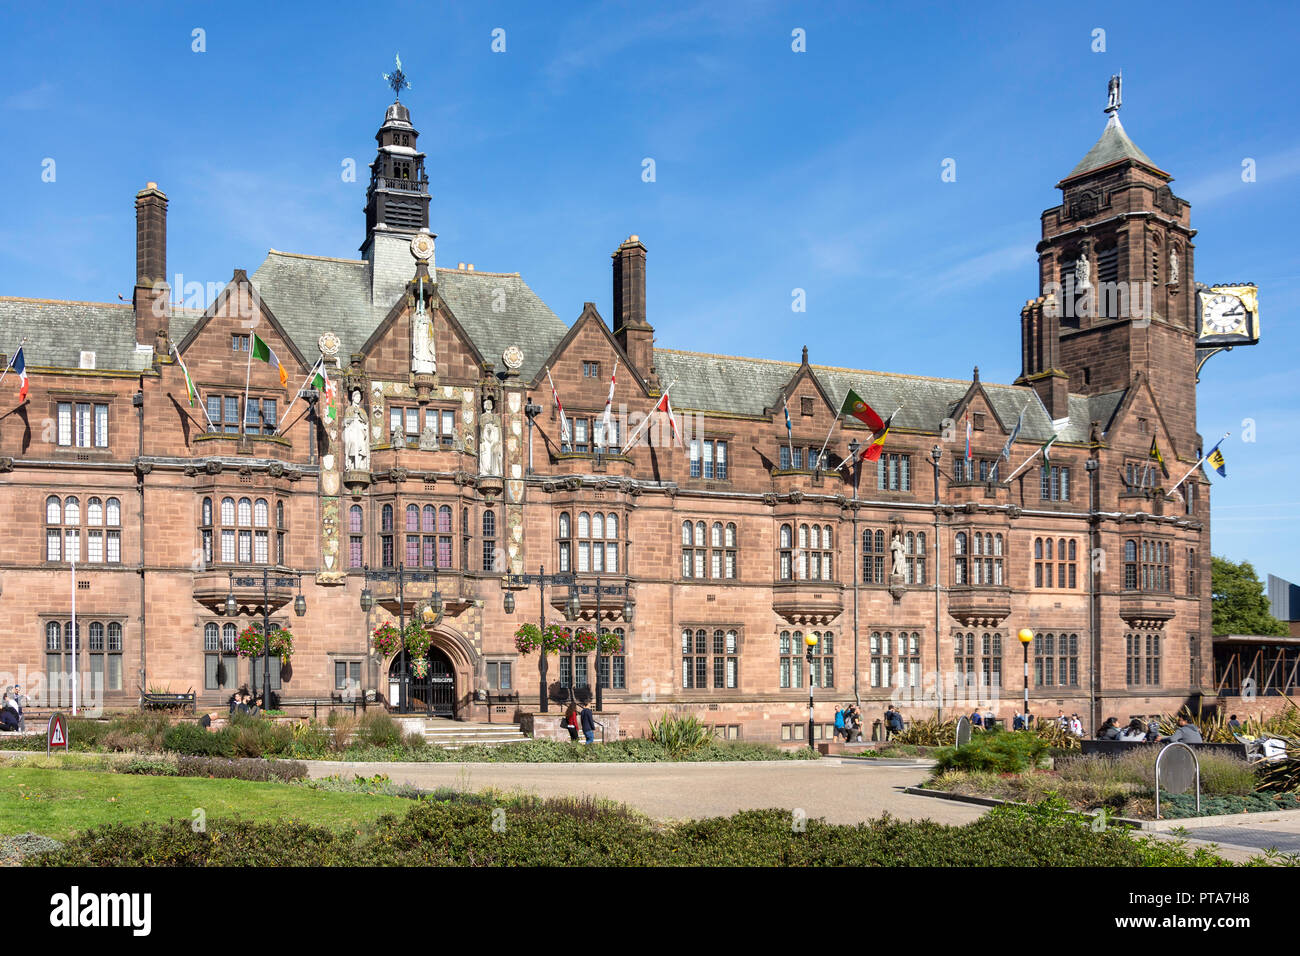 Coventry City Council building, Earl Street, Coventry, West Midlands, England, United Kingdom Stock Photo